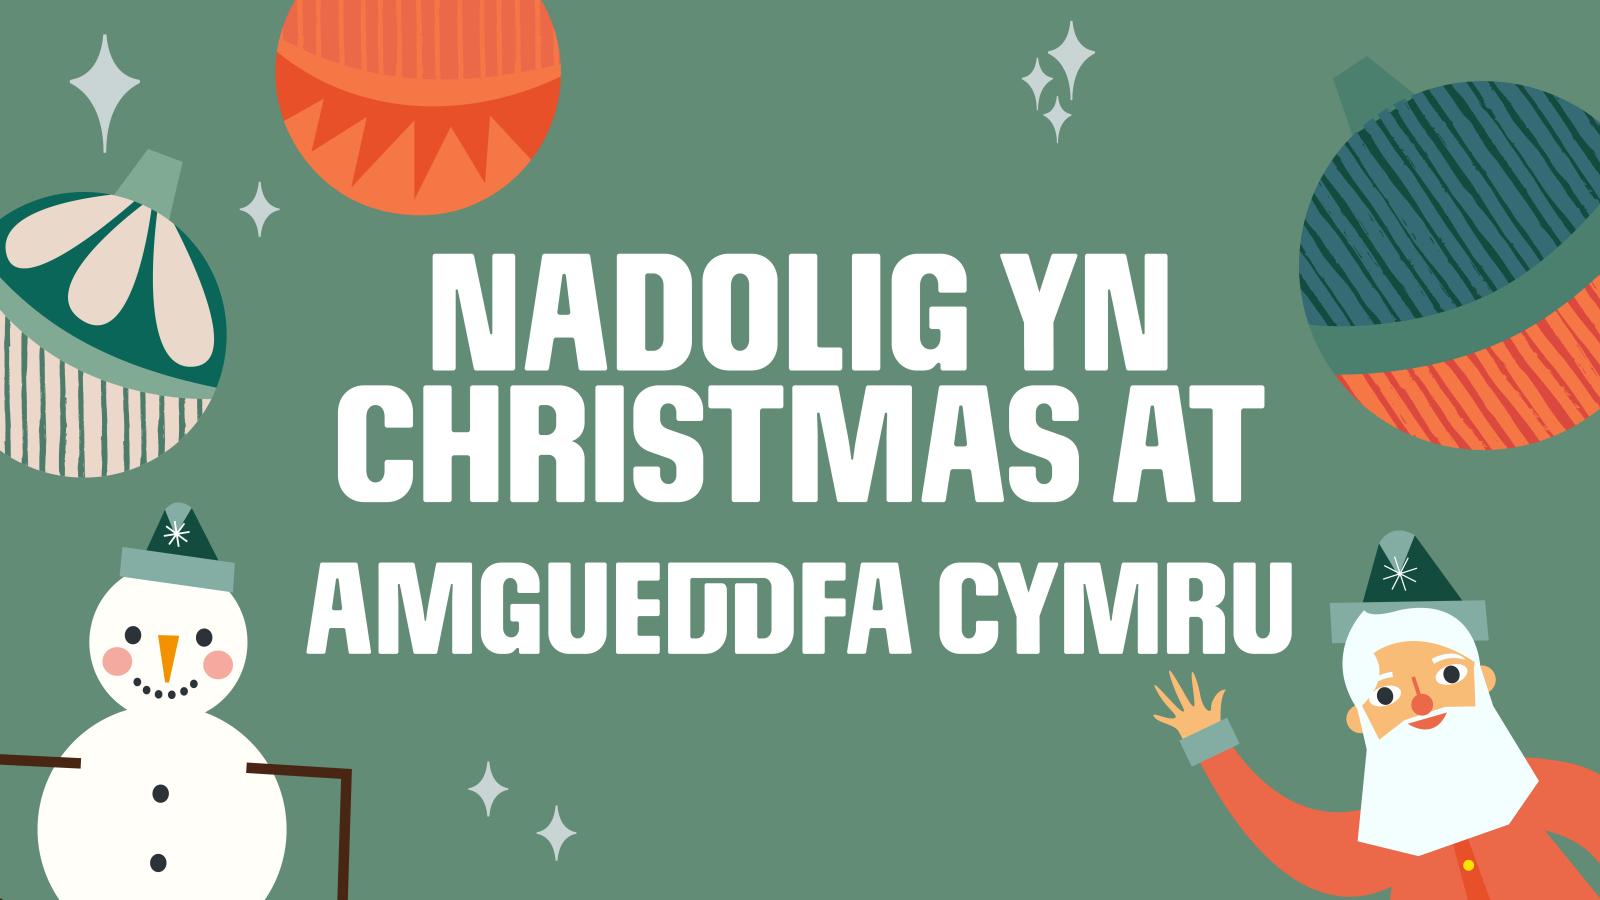 Christmasy banner with a green background with an animated father Christmas and snowman in the bottom corners and baubles in the the top, the words 'Christmas at Amgueddfa Cymru are in white in the middle of the banner'